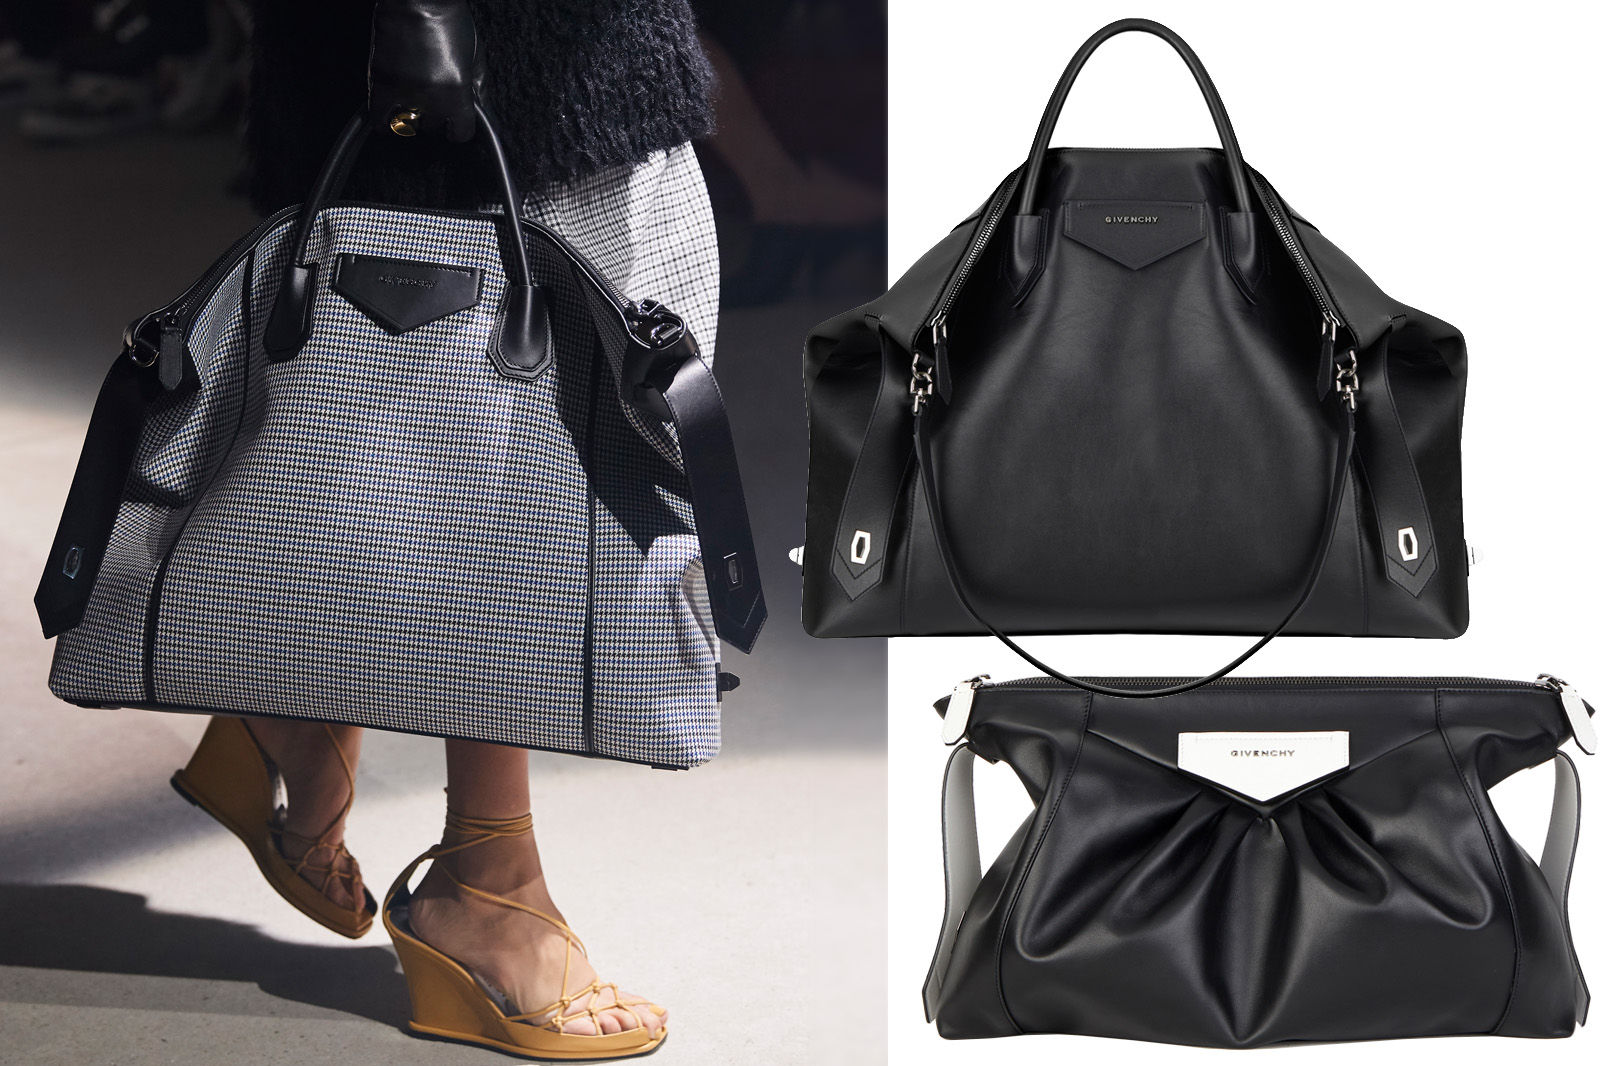 Why The Antigona Soft Bag by Givenchy Should Be On Your Radar